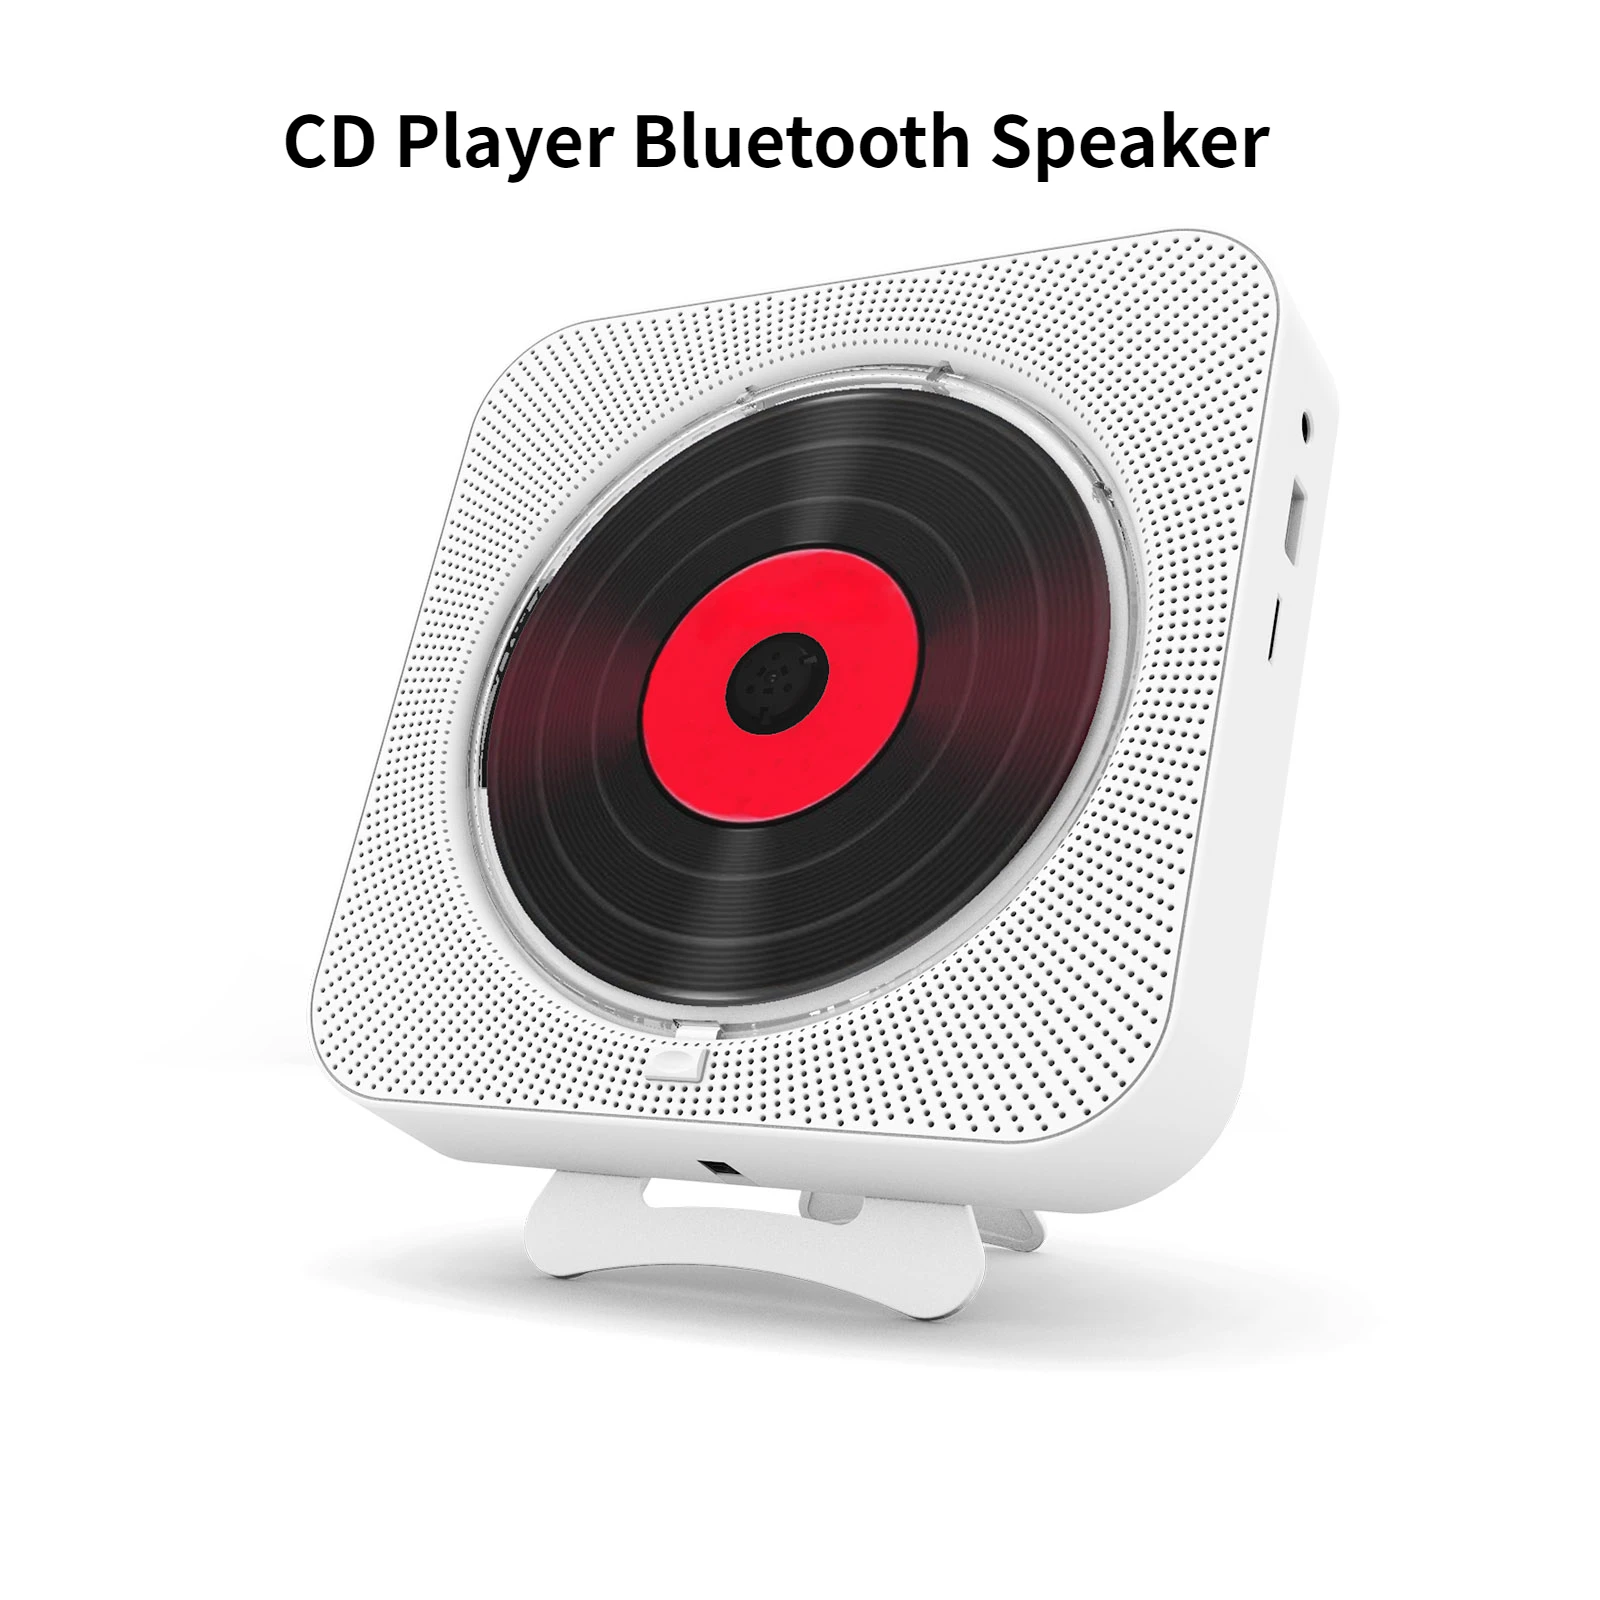 Portable Wall-mounted CD Player Bluetooth Speaker+LED Display Portable Home Audio Boombox With Remote Control FM Radio